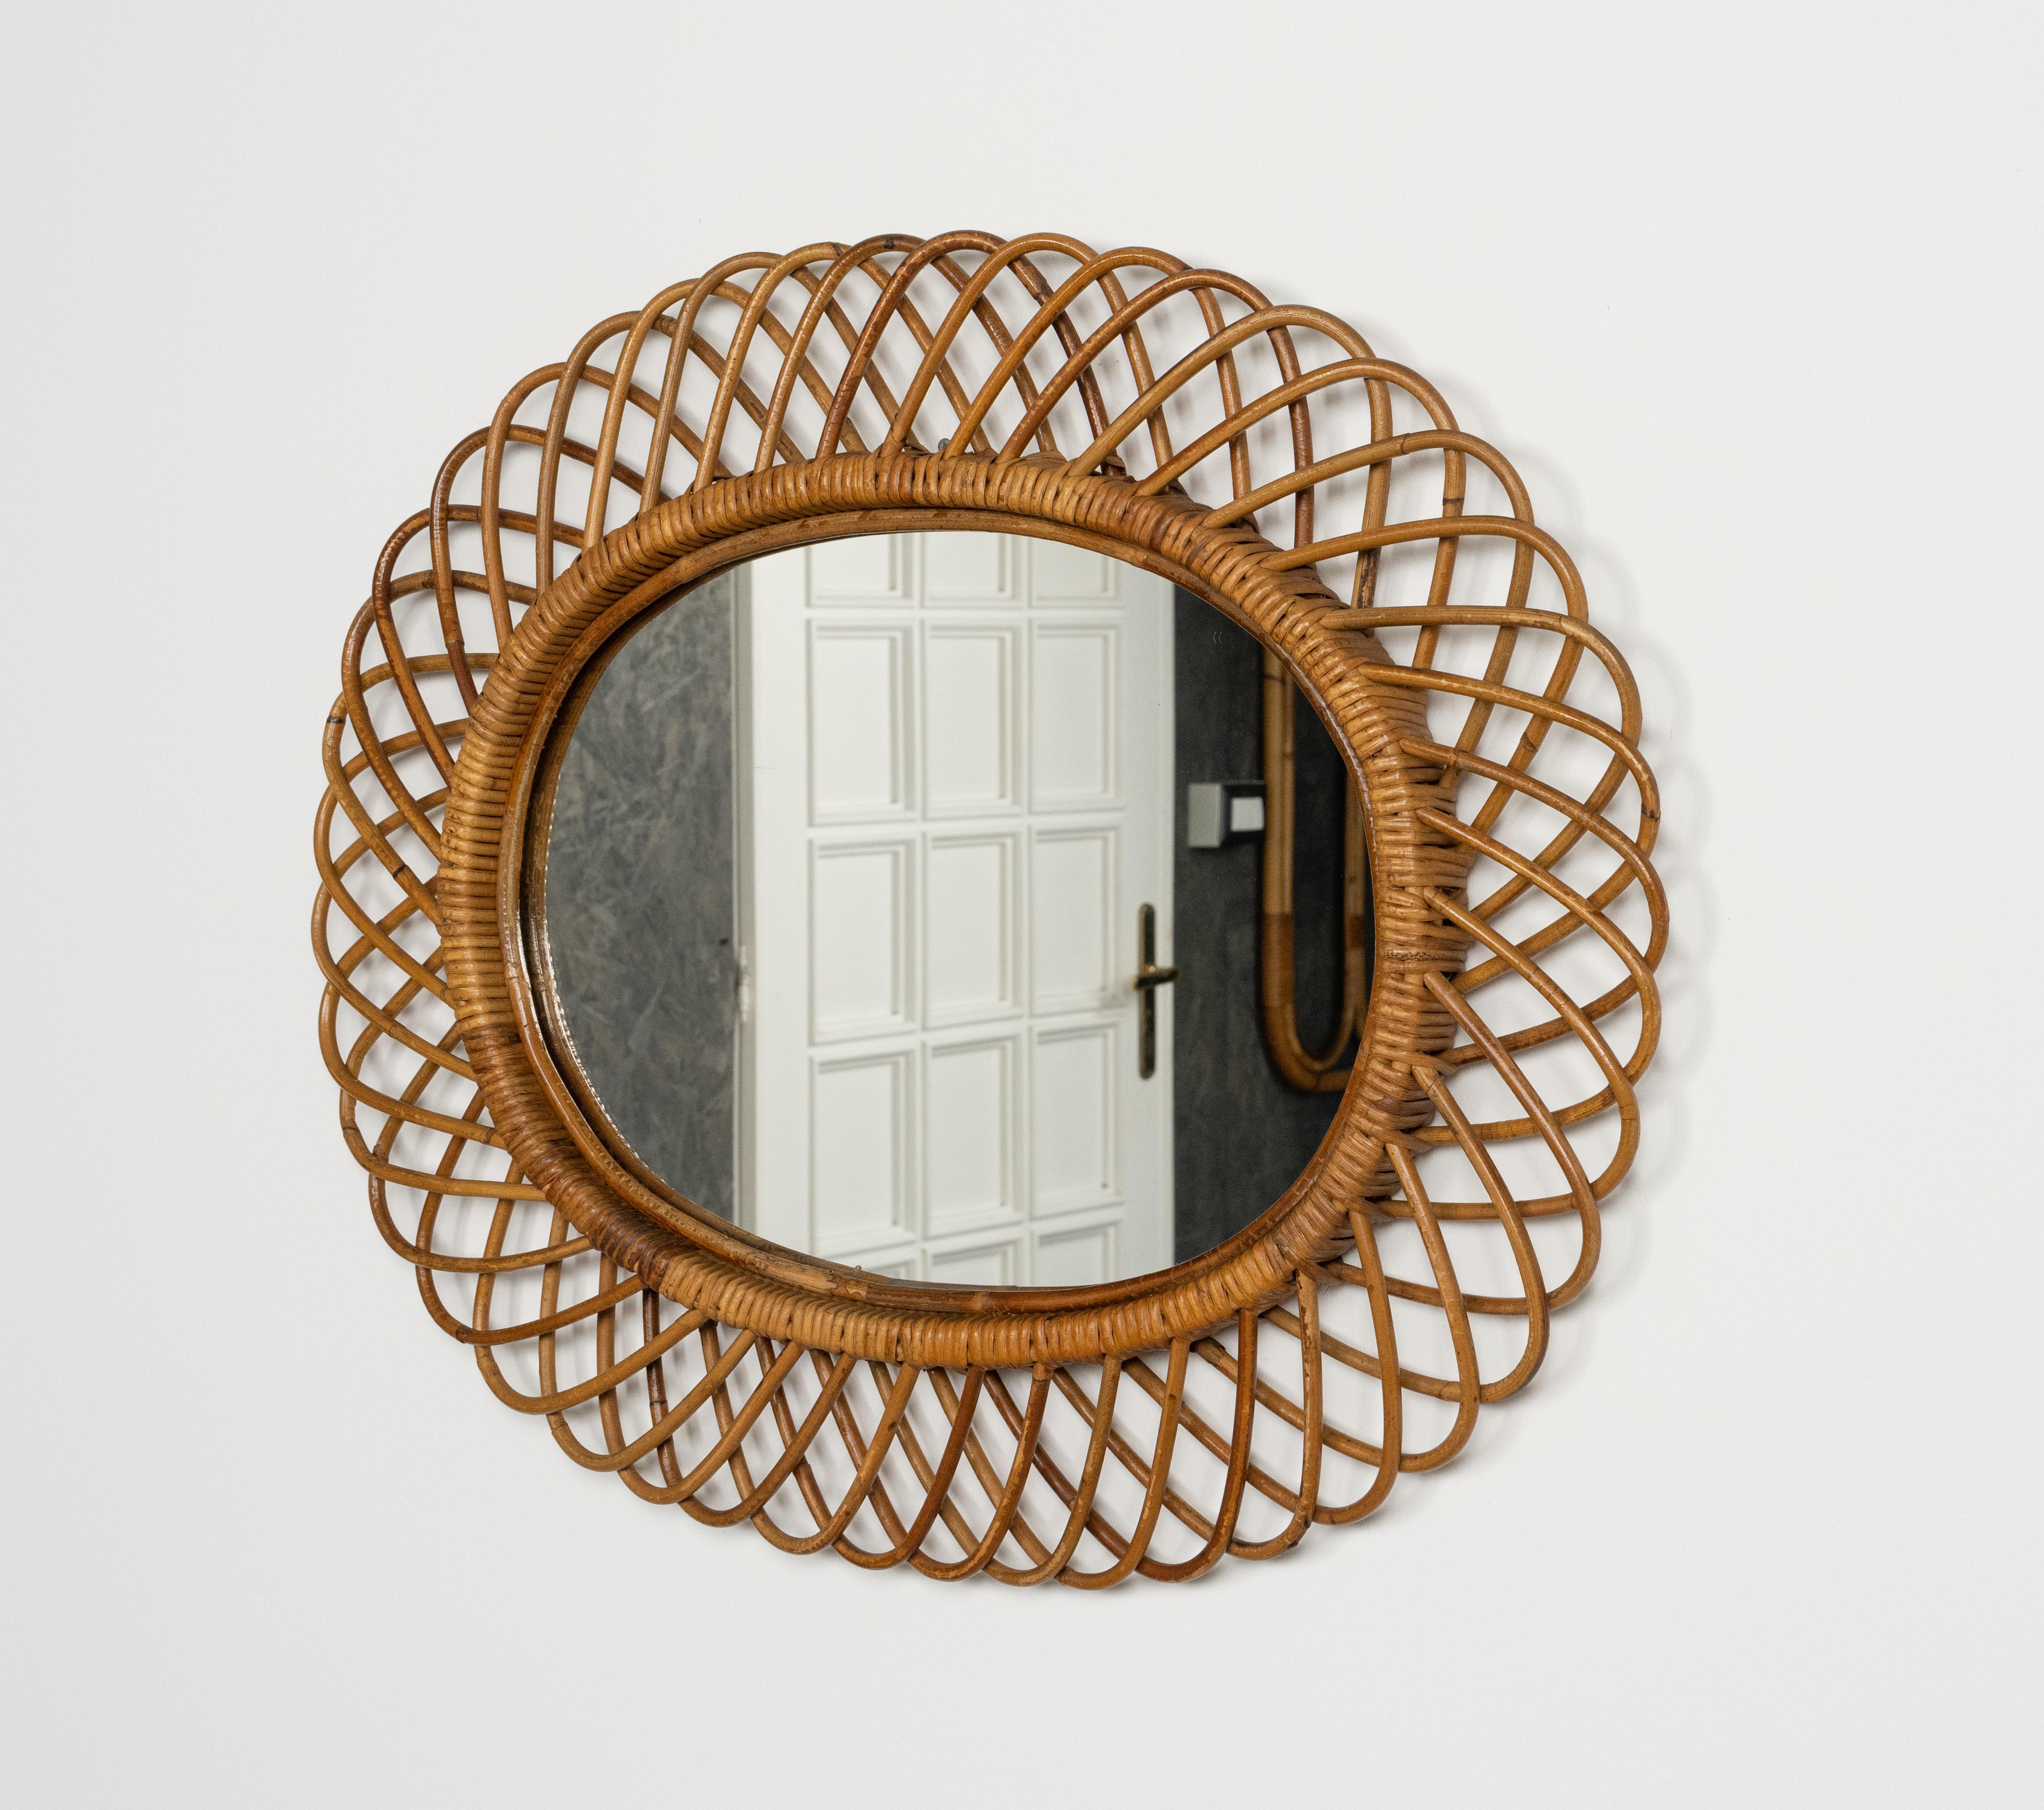 Midcentury Rattan and Bamboo Oval Wall Mirror by Franco Albini, Italy 1960s For Sale 1